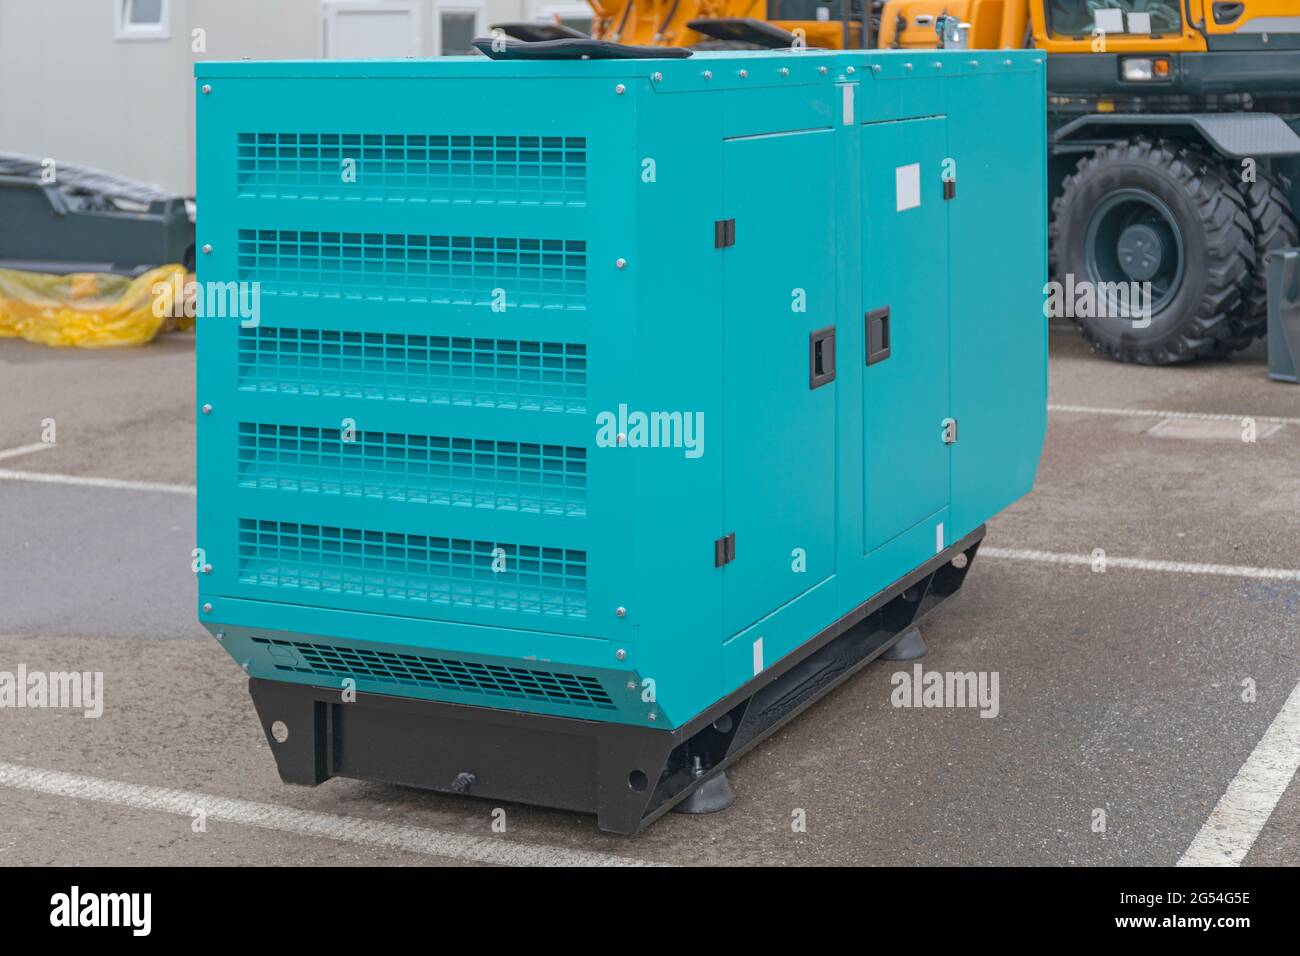 Electric Power Generator Outside at Parking Lot Stock Photo Alamy